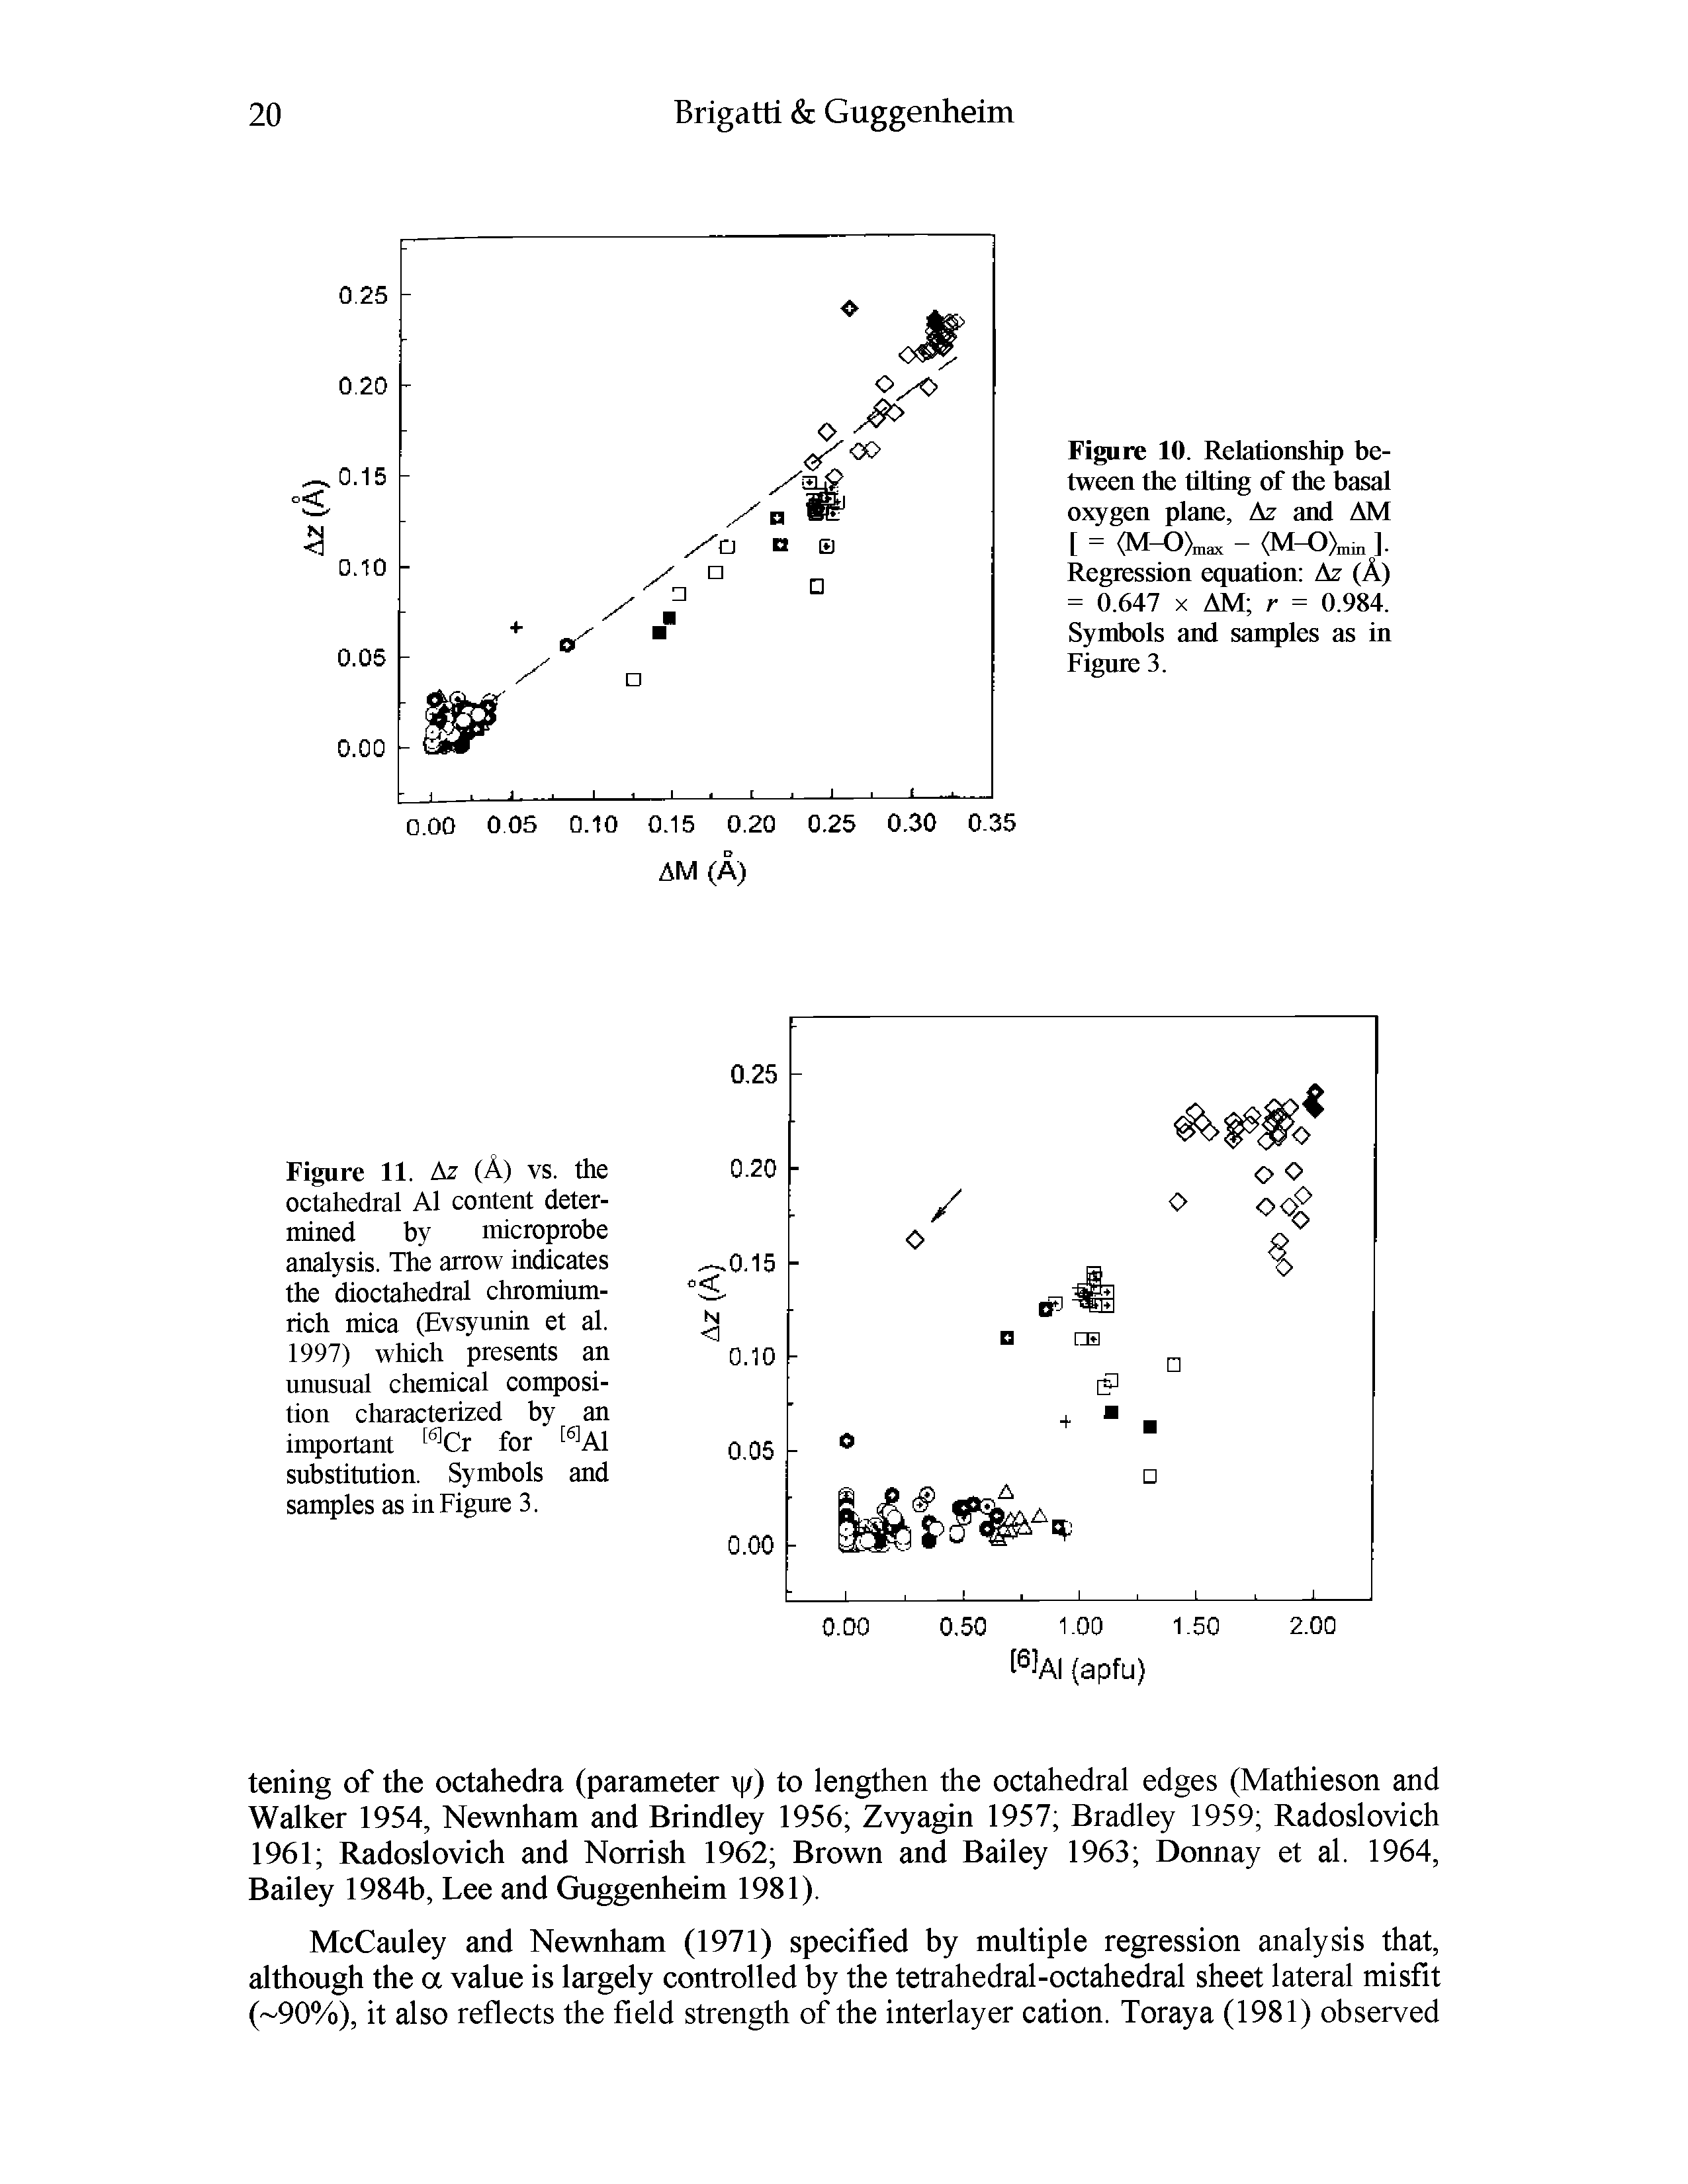 Figure 11. Az (A) vs. the octahedral A1 content determined by microprobe analysis. The arrow indicates the dioctahedral chromium-rich mica (Evsyunin et al. 1997) which presents an unusual chemical composition characterized by an important "" Cr for A1 substitution. Symbols and samples as in Figure 3.